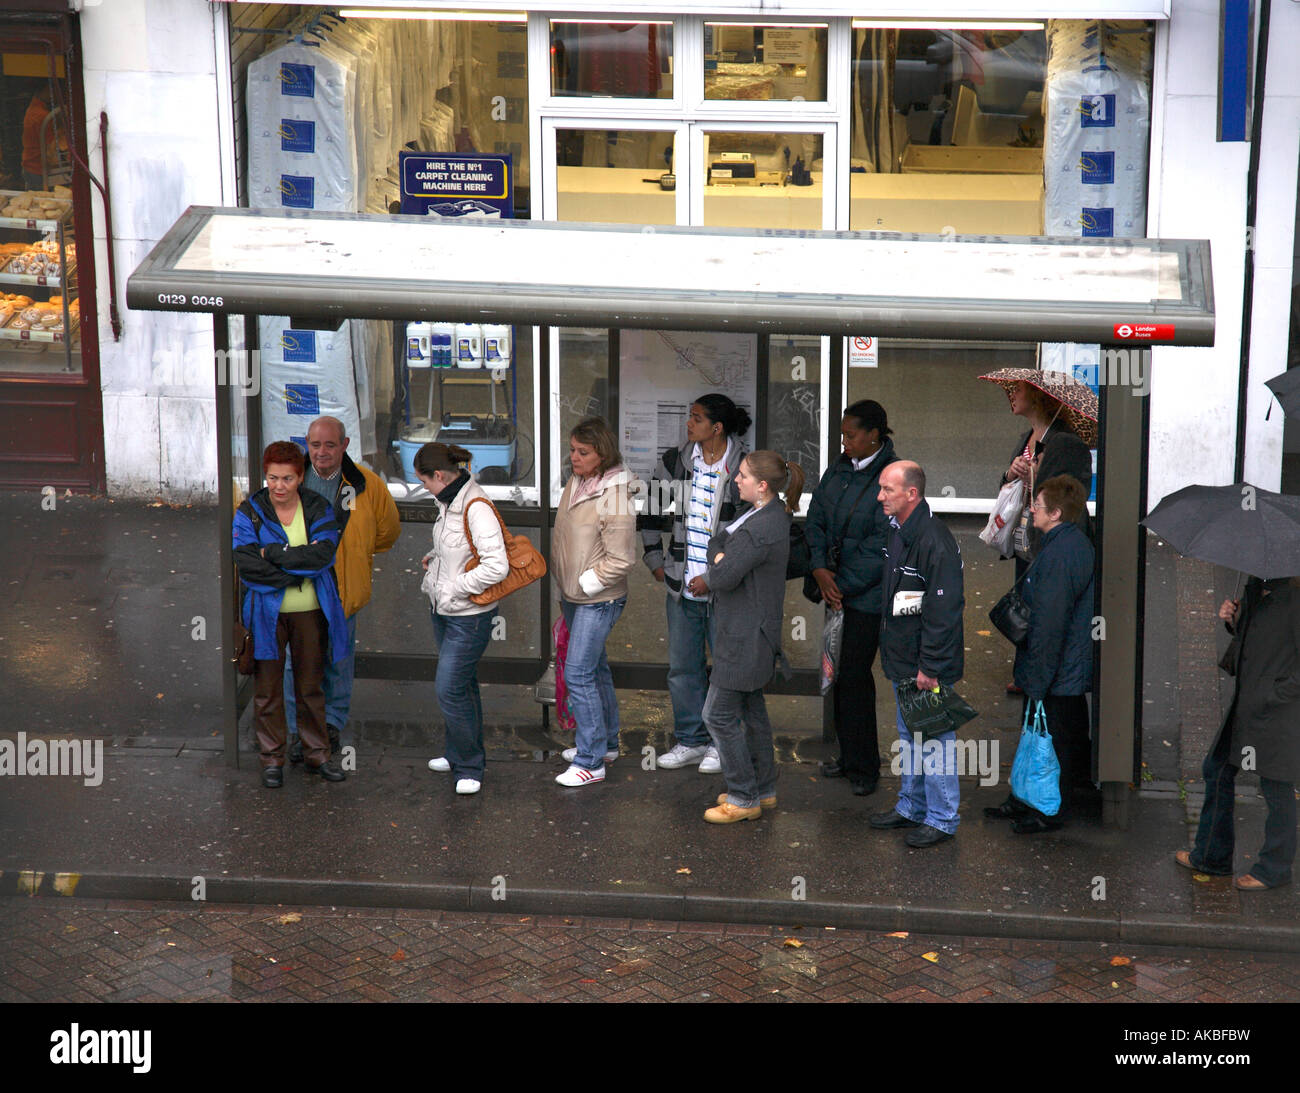 People waiting at a bus stop in London Uk. Stock Photo